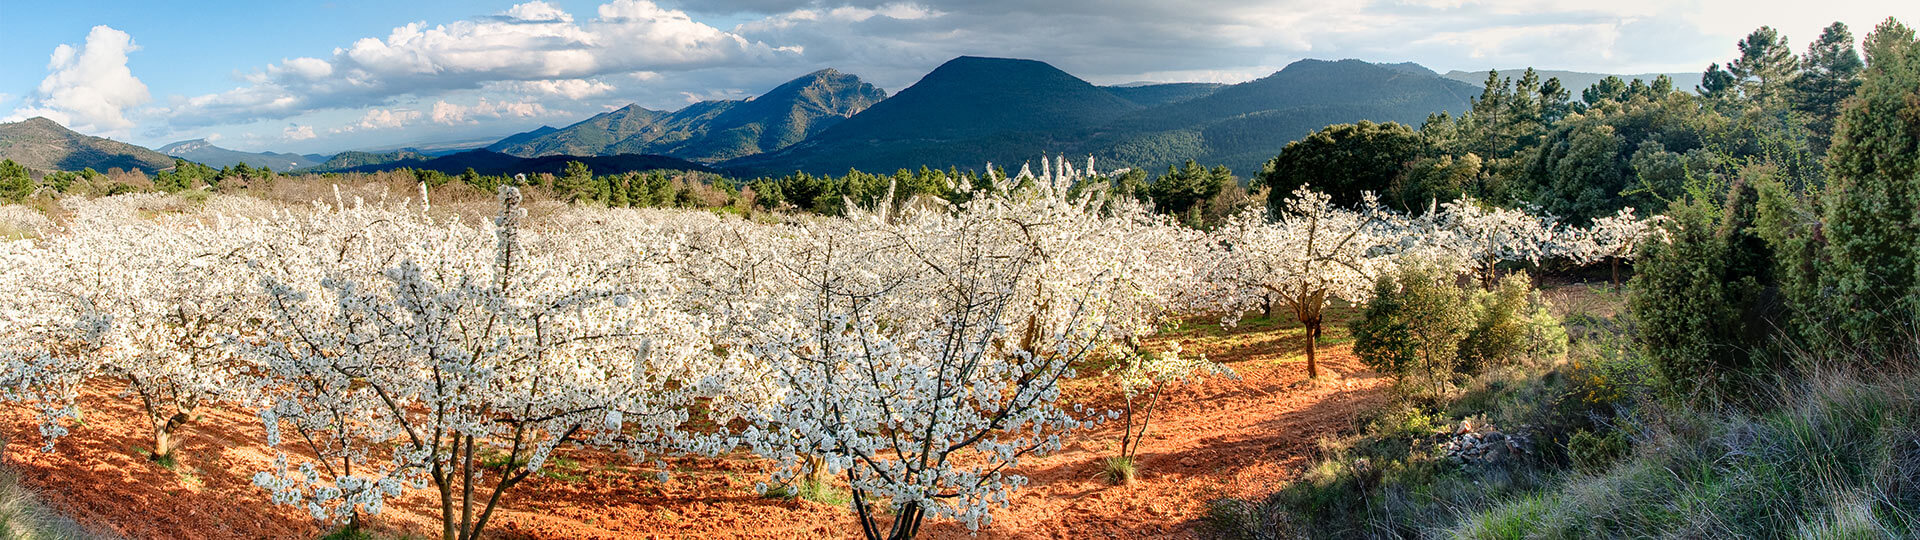  Cherry trees in blossom in the Jerte Valley, Extremadura